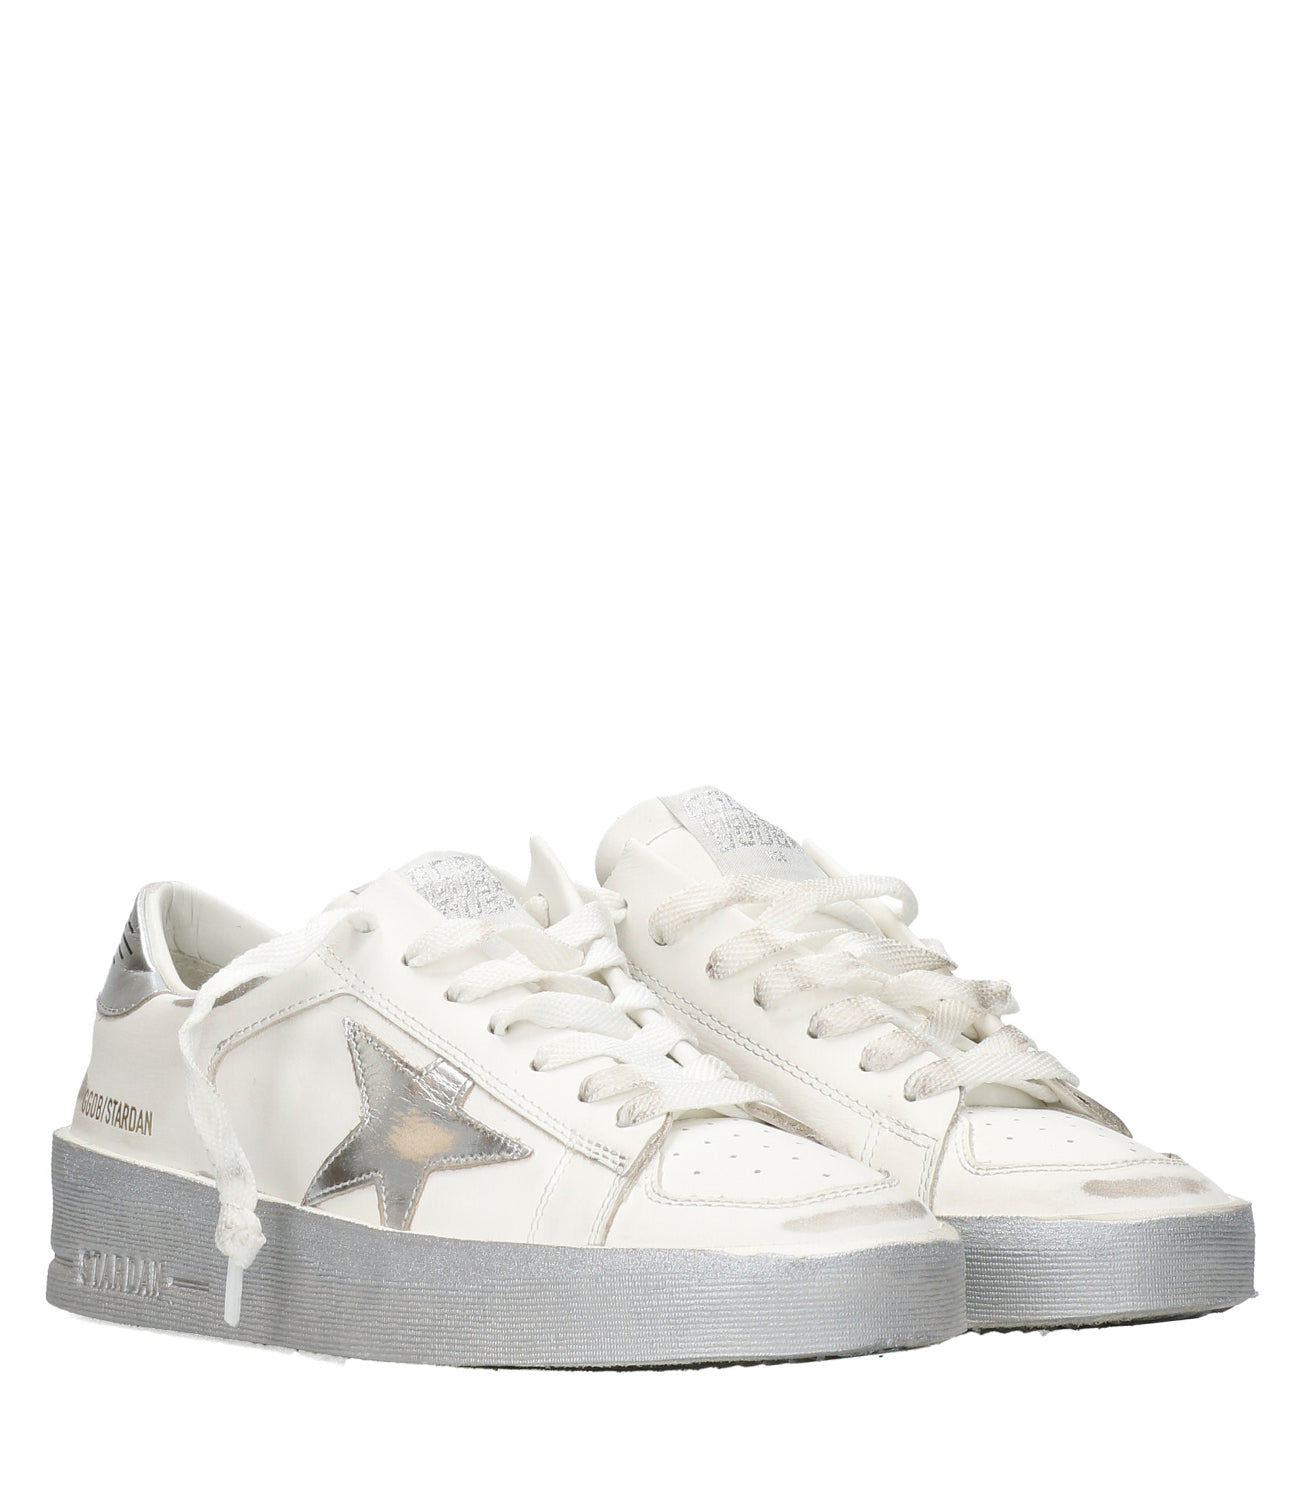 Golden Goose | Stardan Sneakers White and Silver